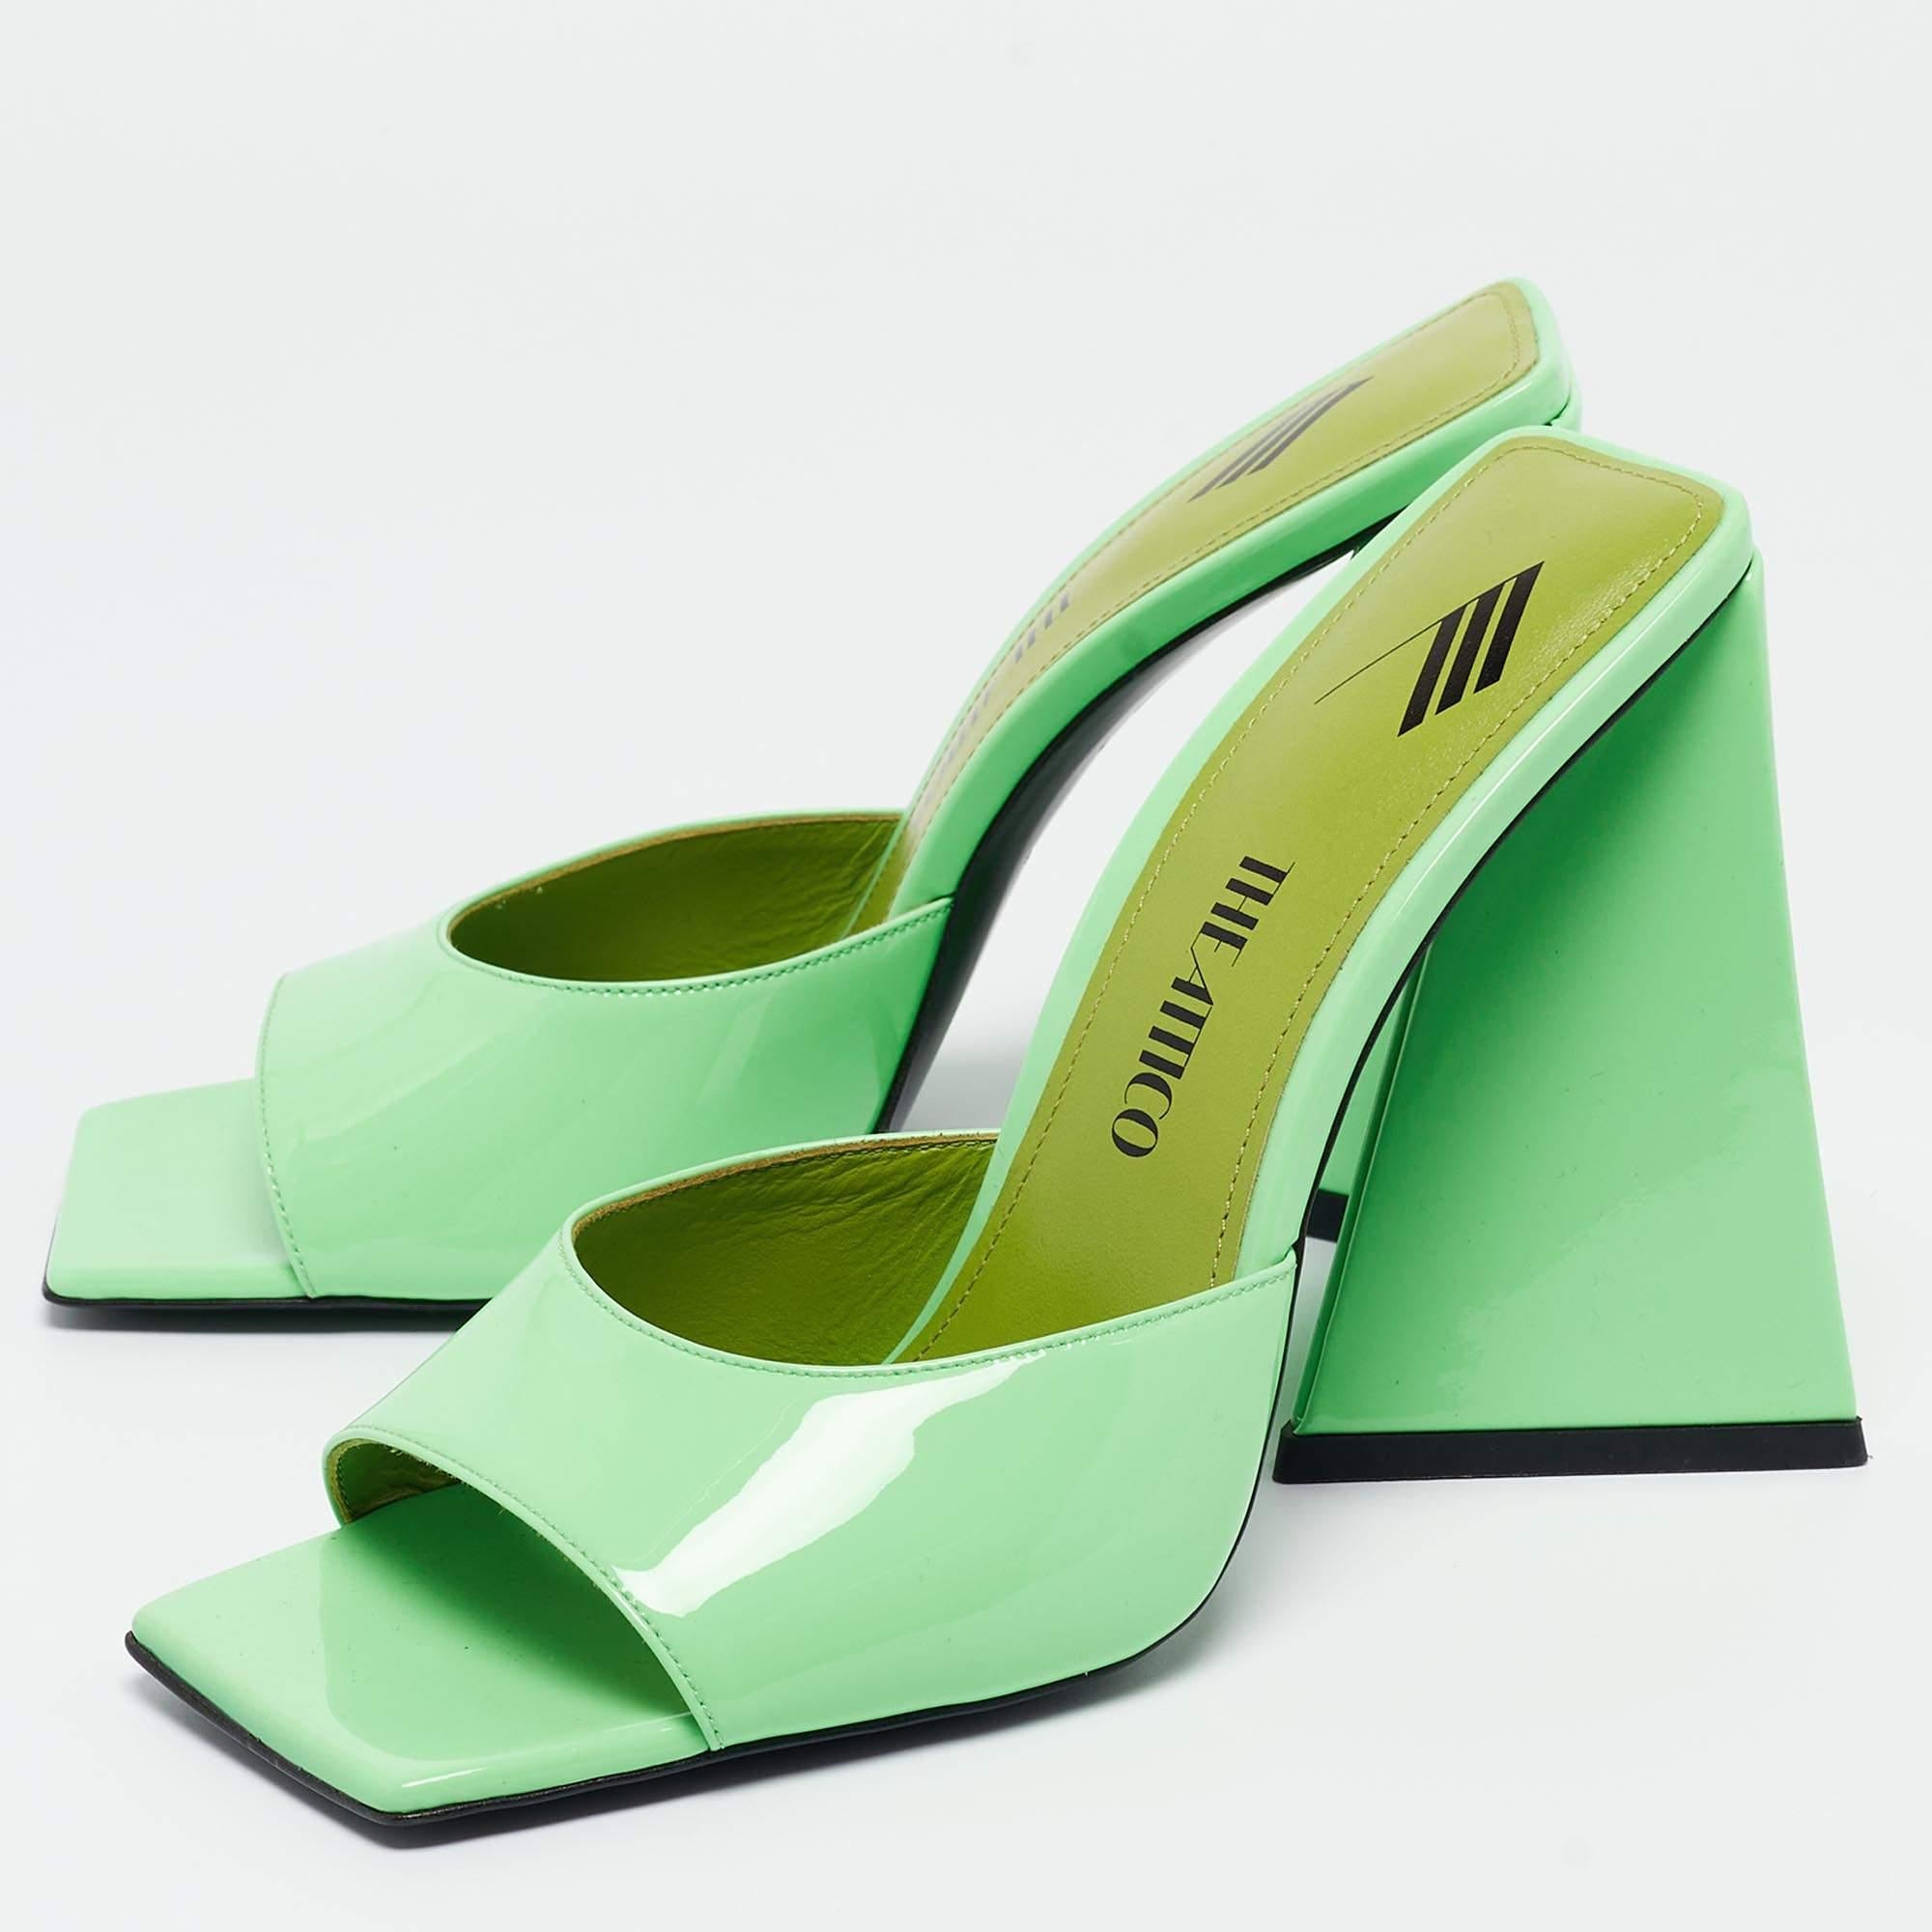 These sandals will offer you both luxury and comfort. Made from quality materials, they come in a stunning neon green shade and are lifted on unique heels.

Includes: Original Box, Info Card